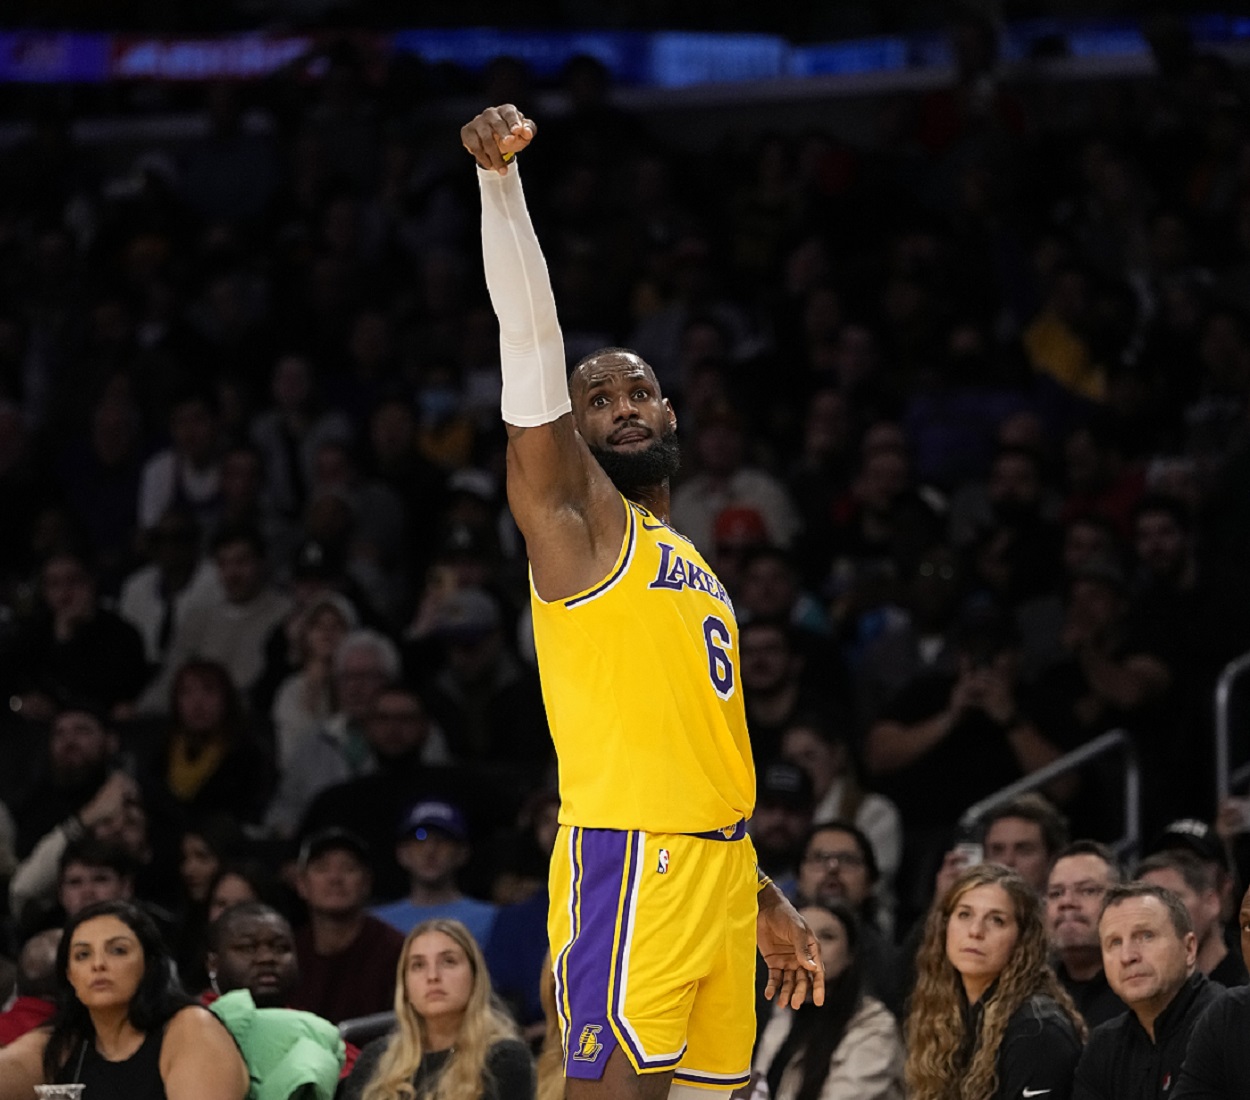 How Close Is LeBron James to Kareem Abdul-Jabbar’s All-Time NBA Scoring Record Following the Lakers’ Win Over the Blazers?